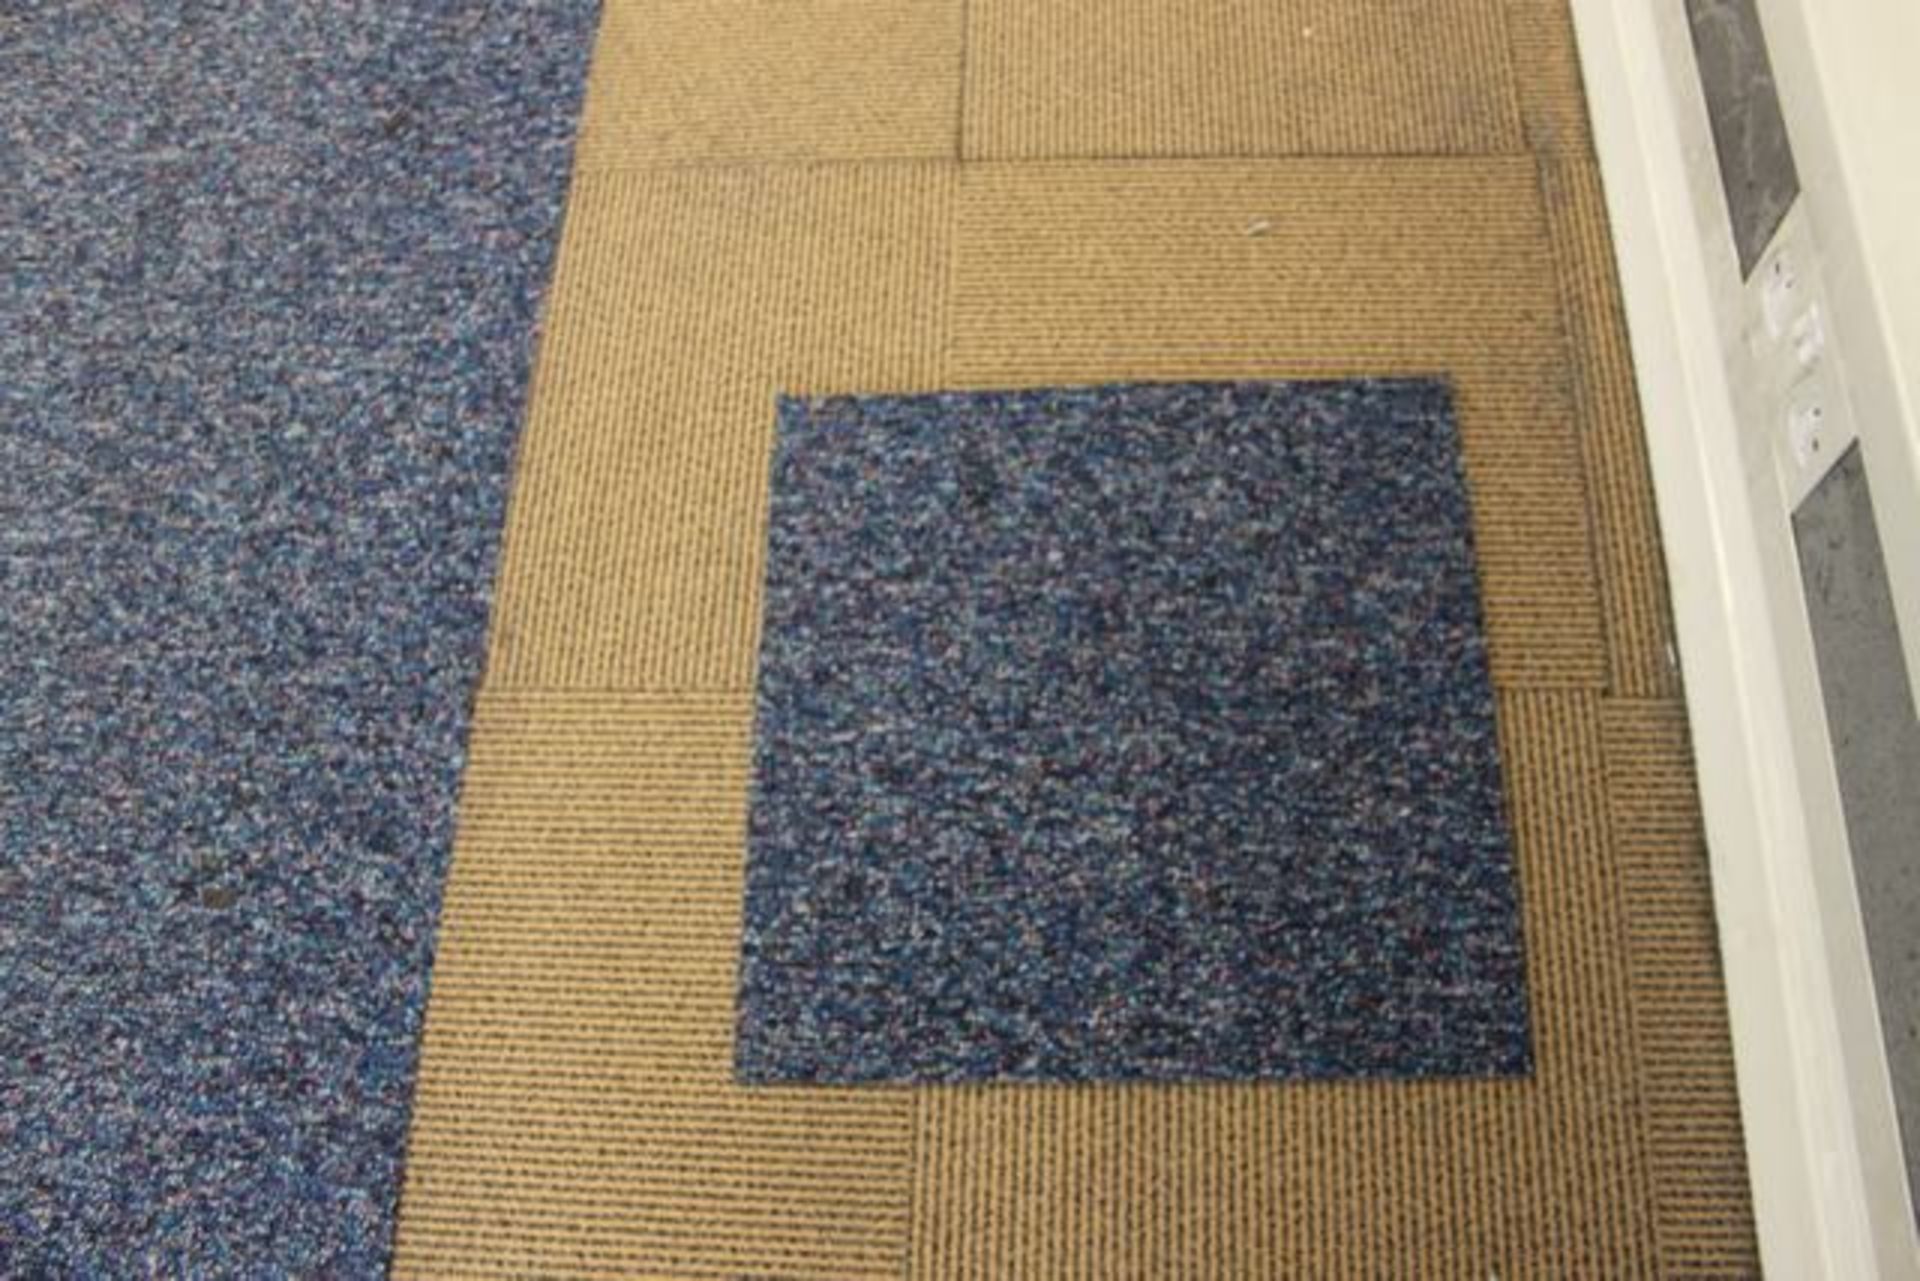 Approximately 1700 x Burmatex looped pile dyed nylon carpet tile 50cm x 50cm >>Lift out charge  150